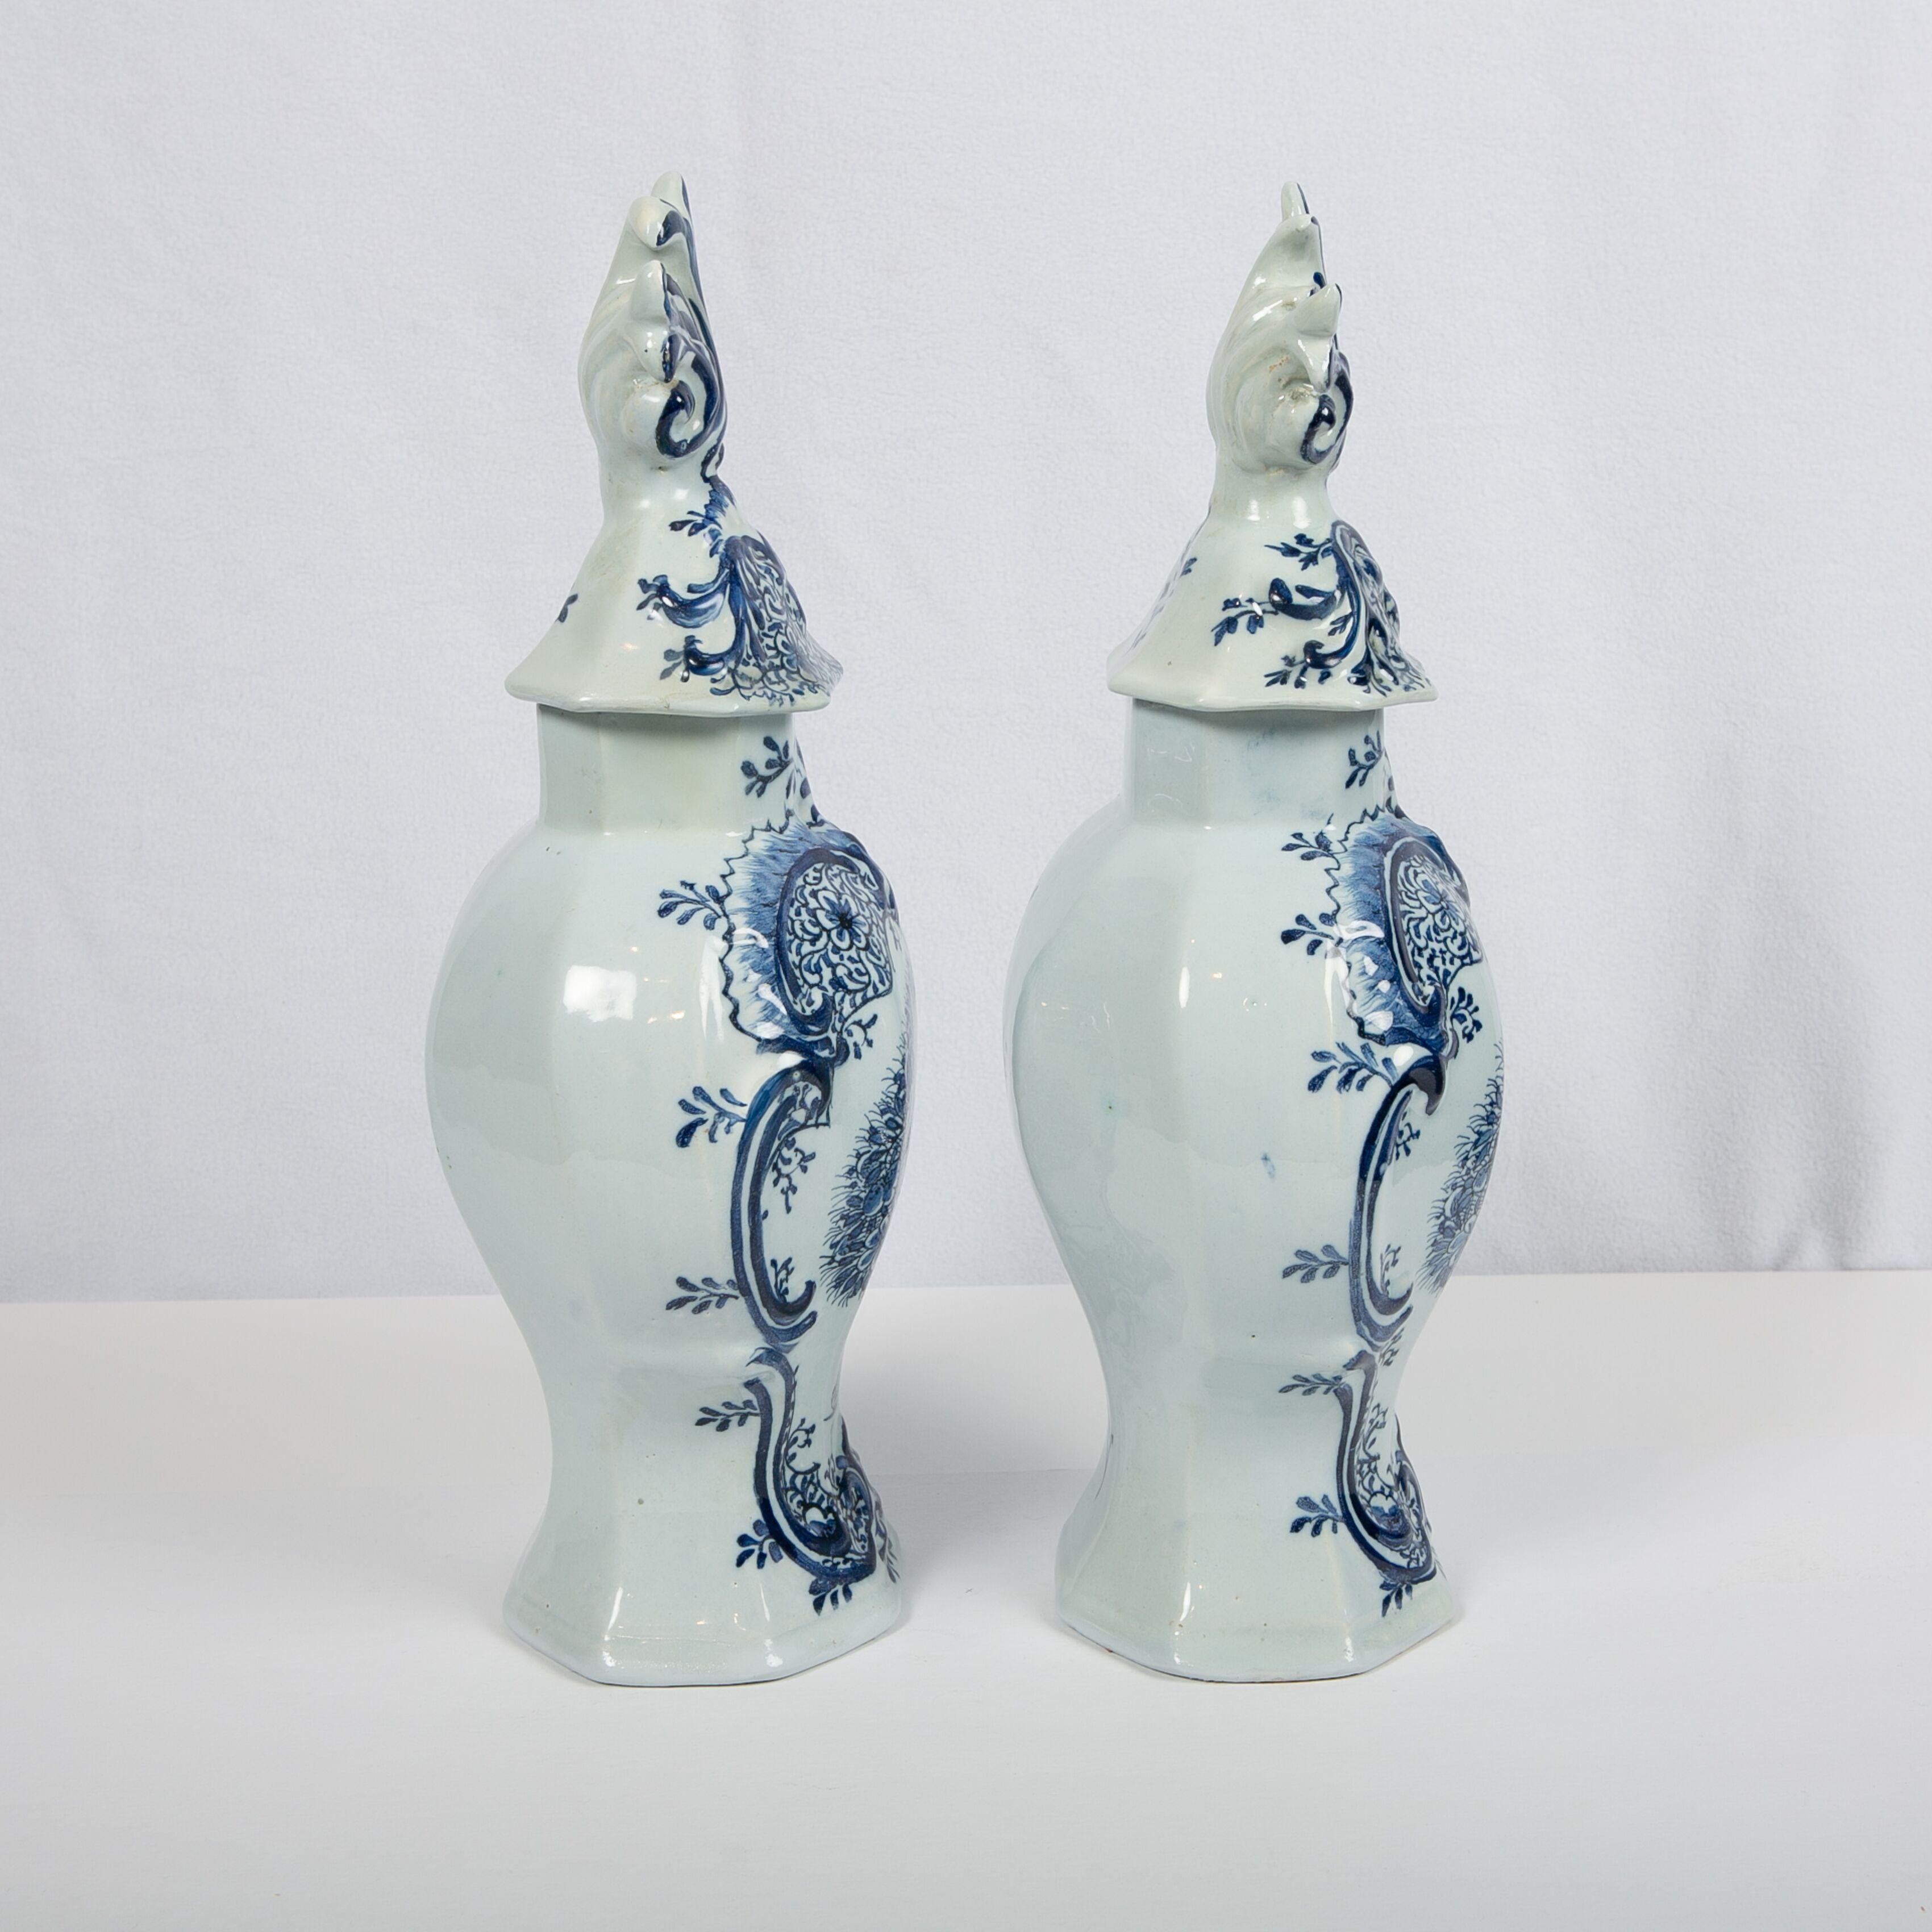 This pair are large for mantle vases. These blue and white Dutch delft mantel (fireplace) jars were made by 